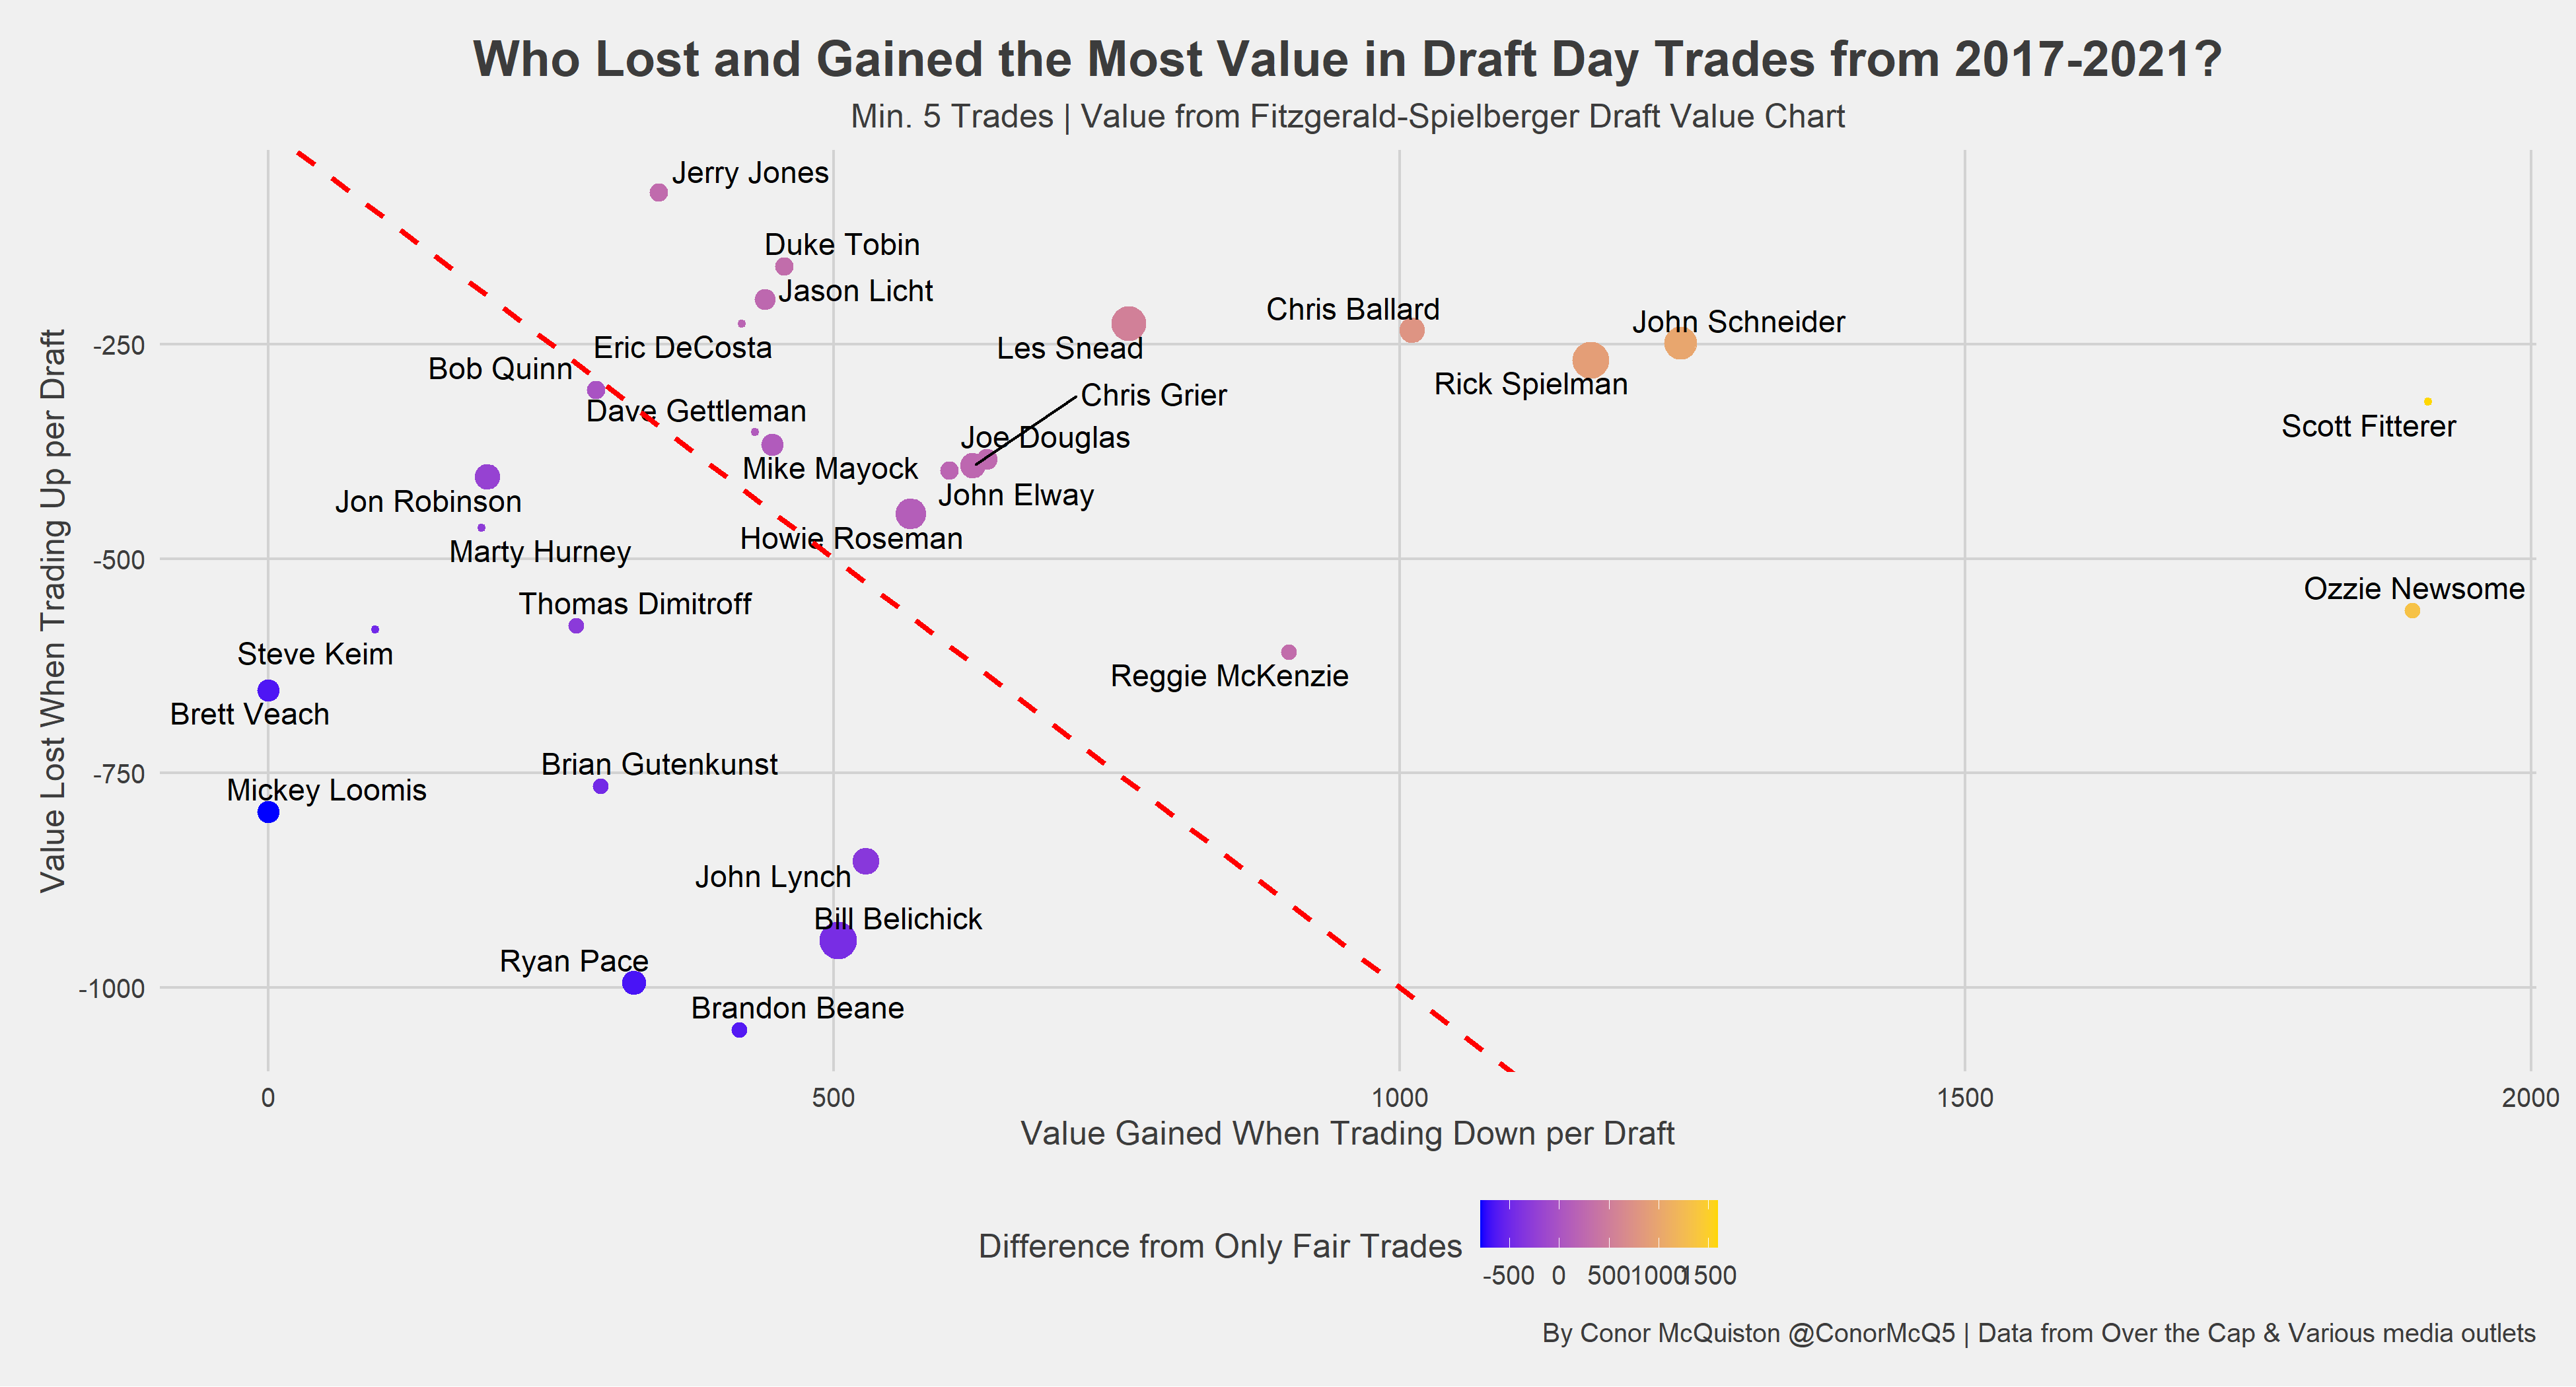 nfl draft with trades